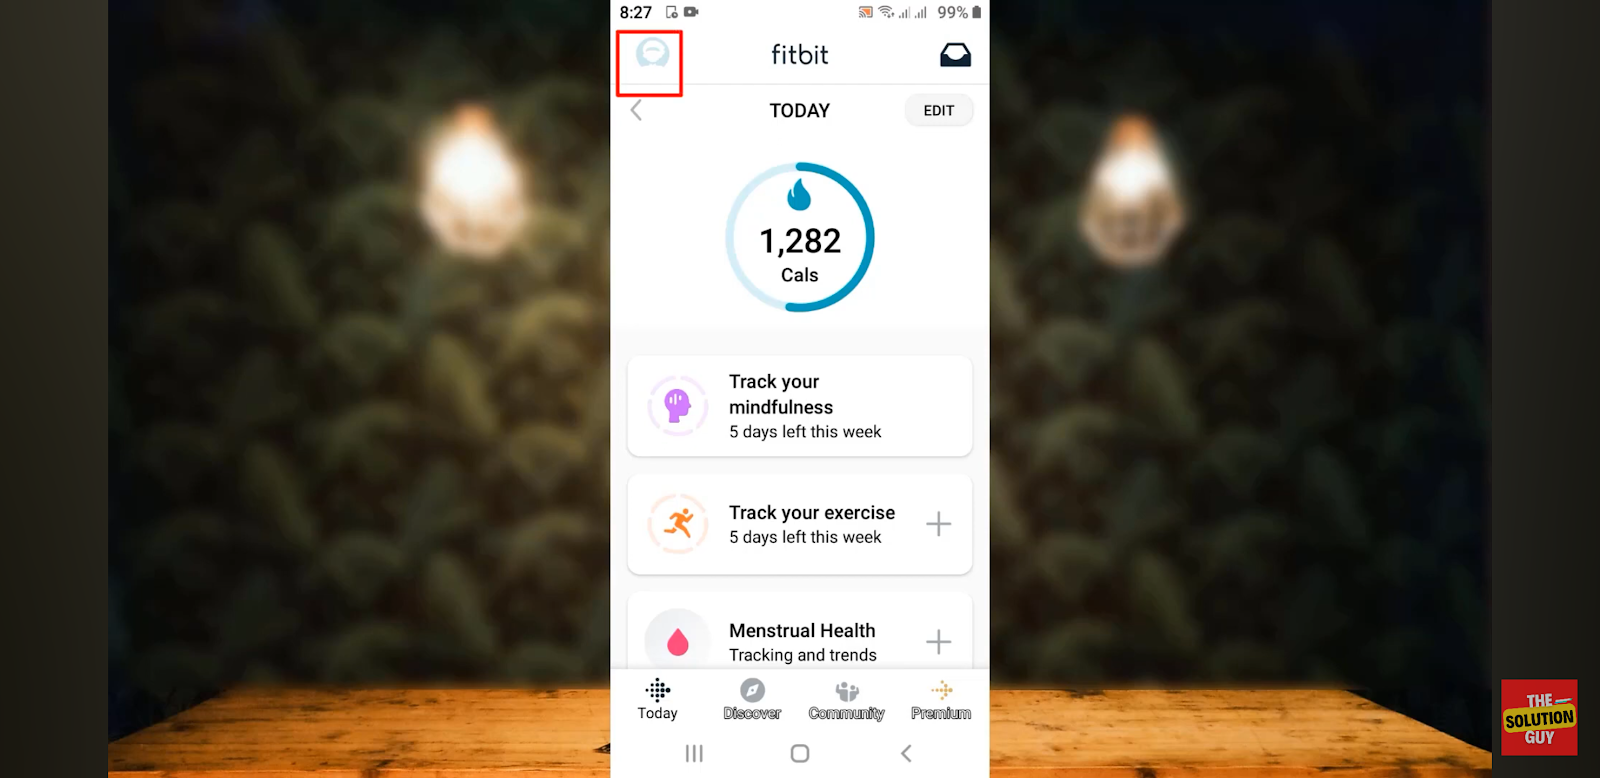 Remove Email from Fitbit Account profile